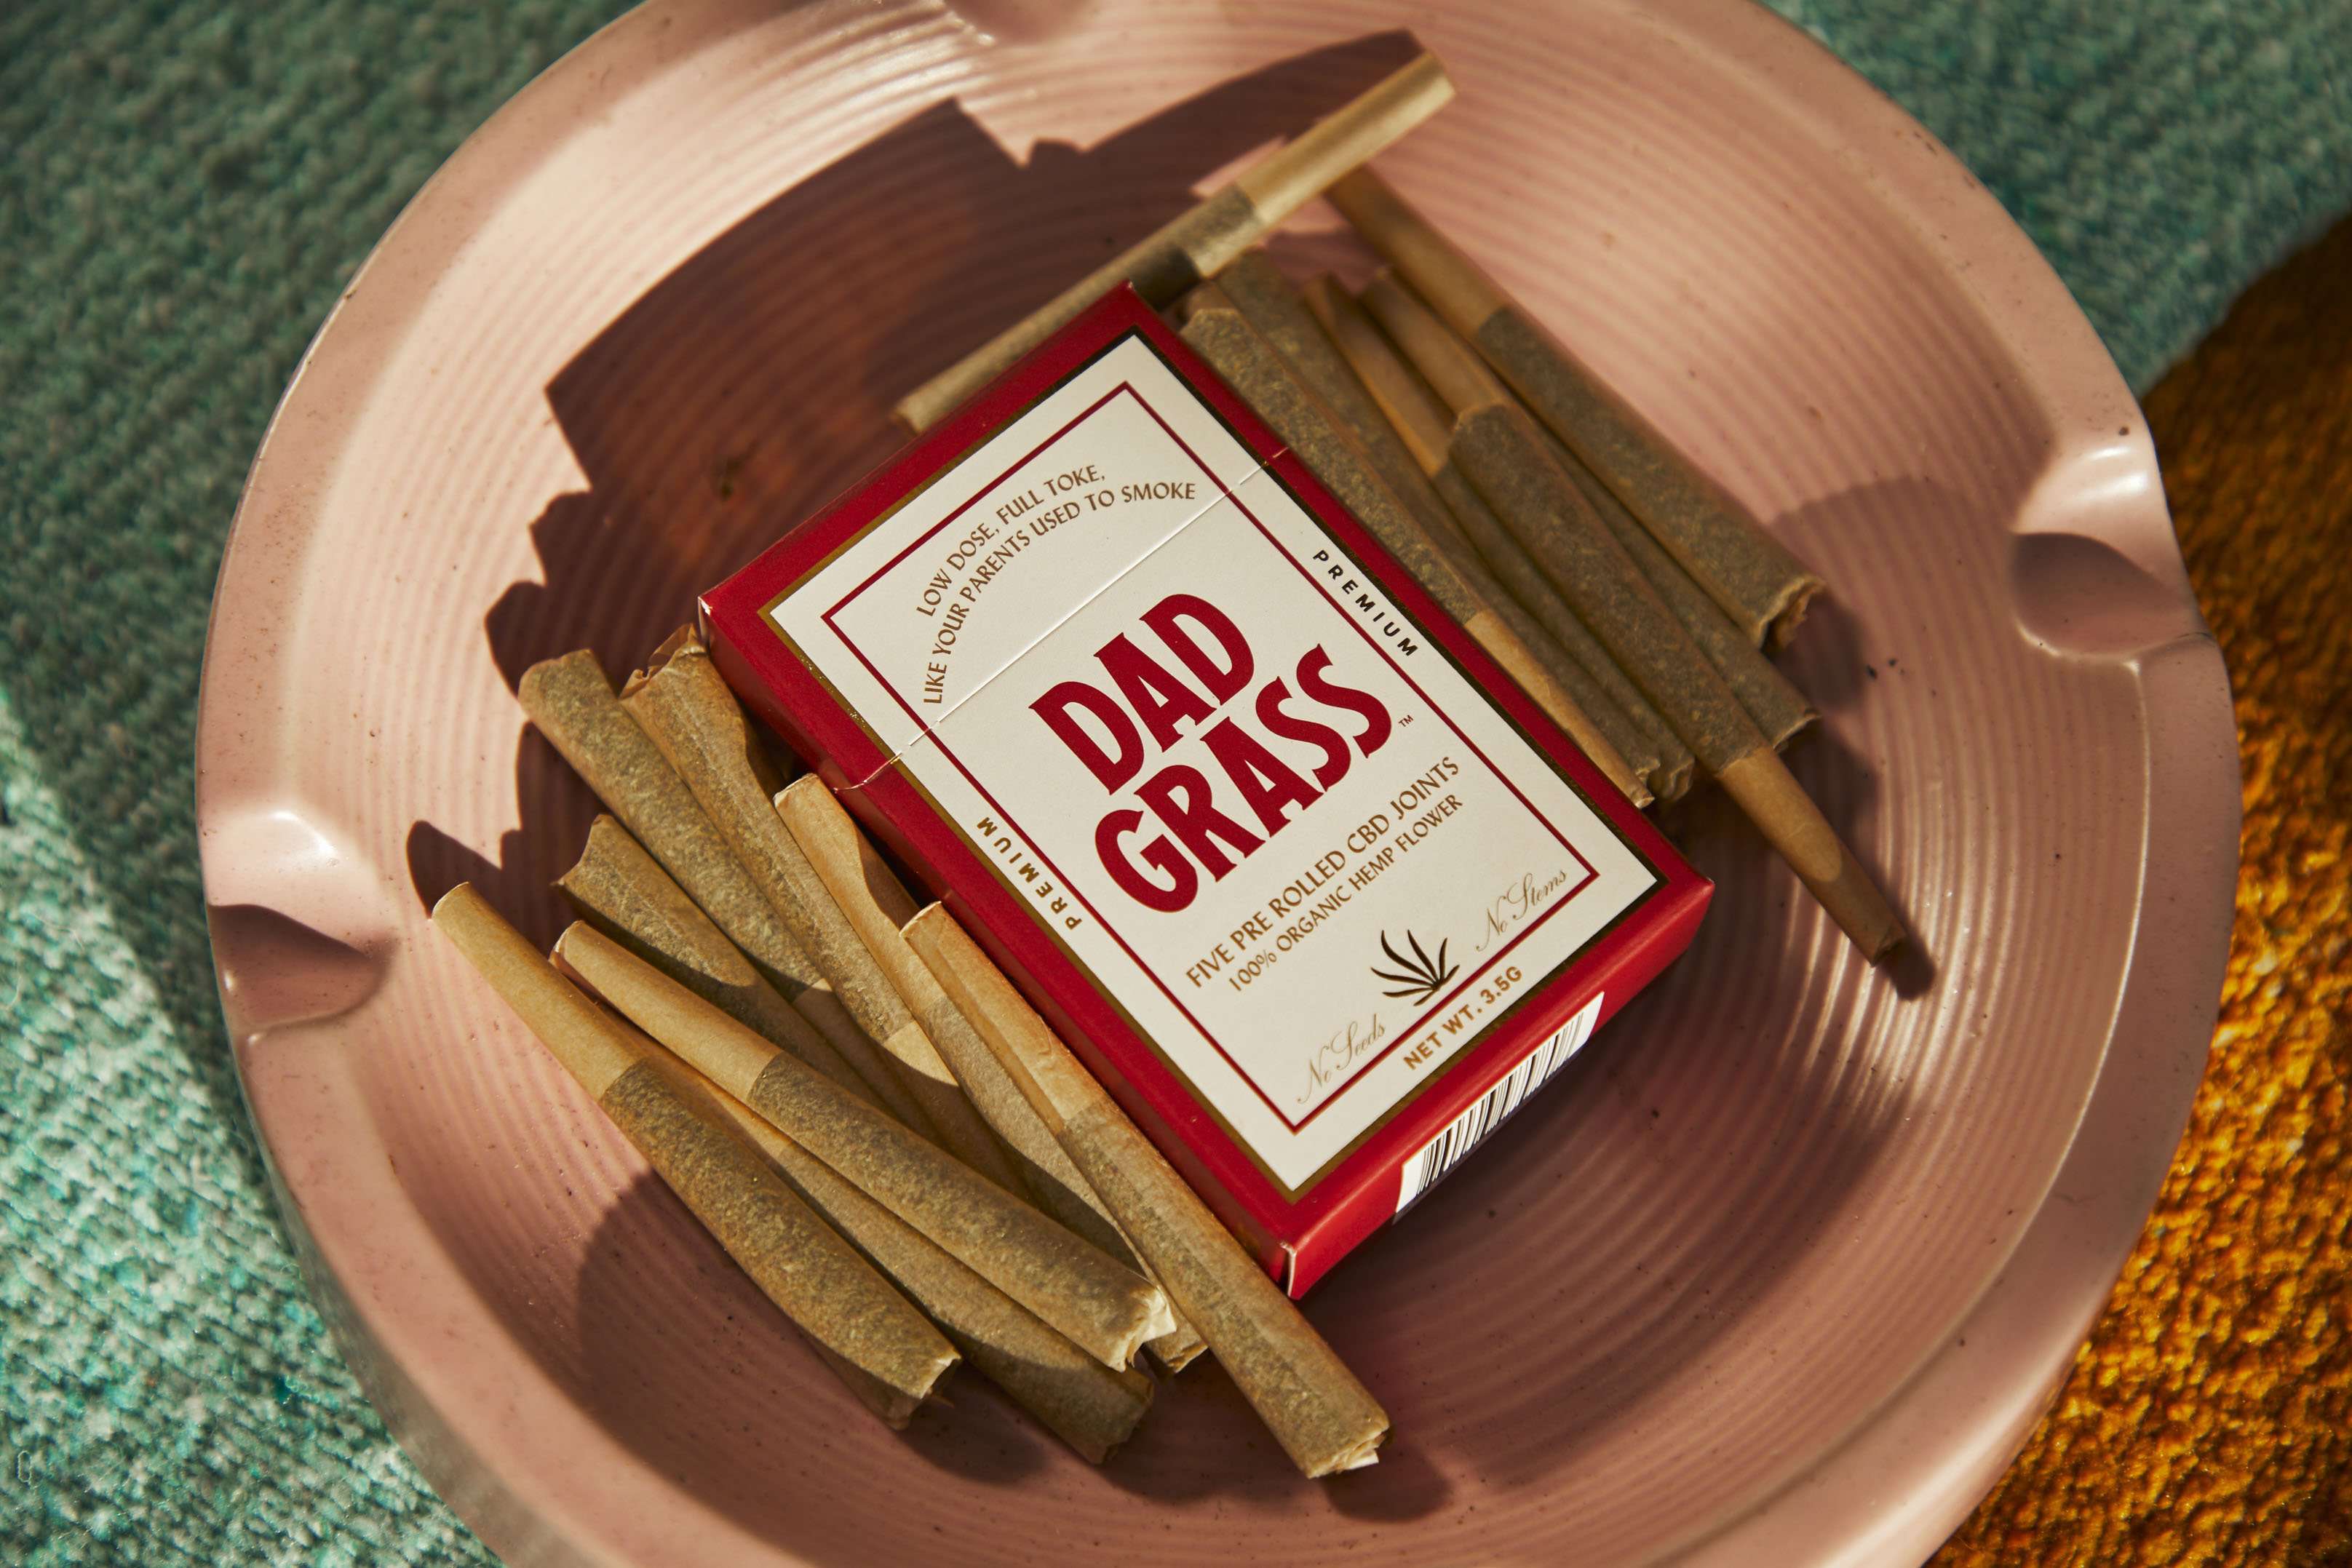 Dad Grass - Rolling Tray/Valet